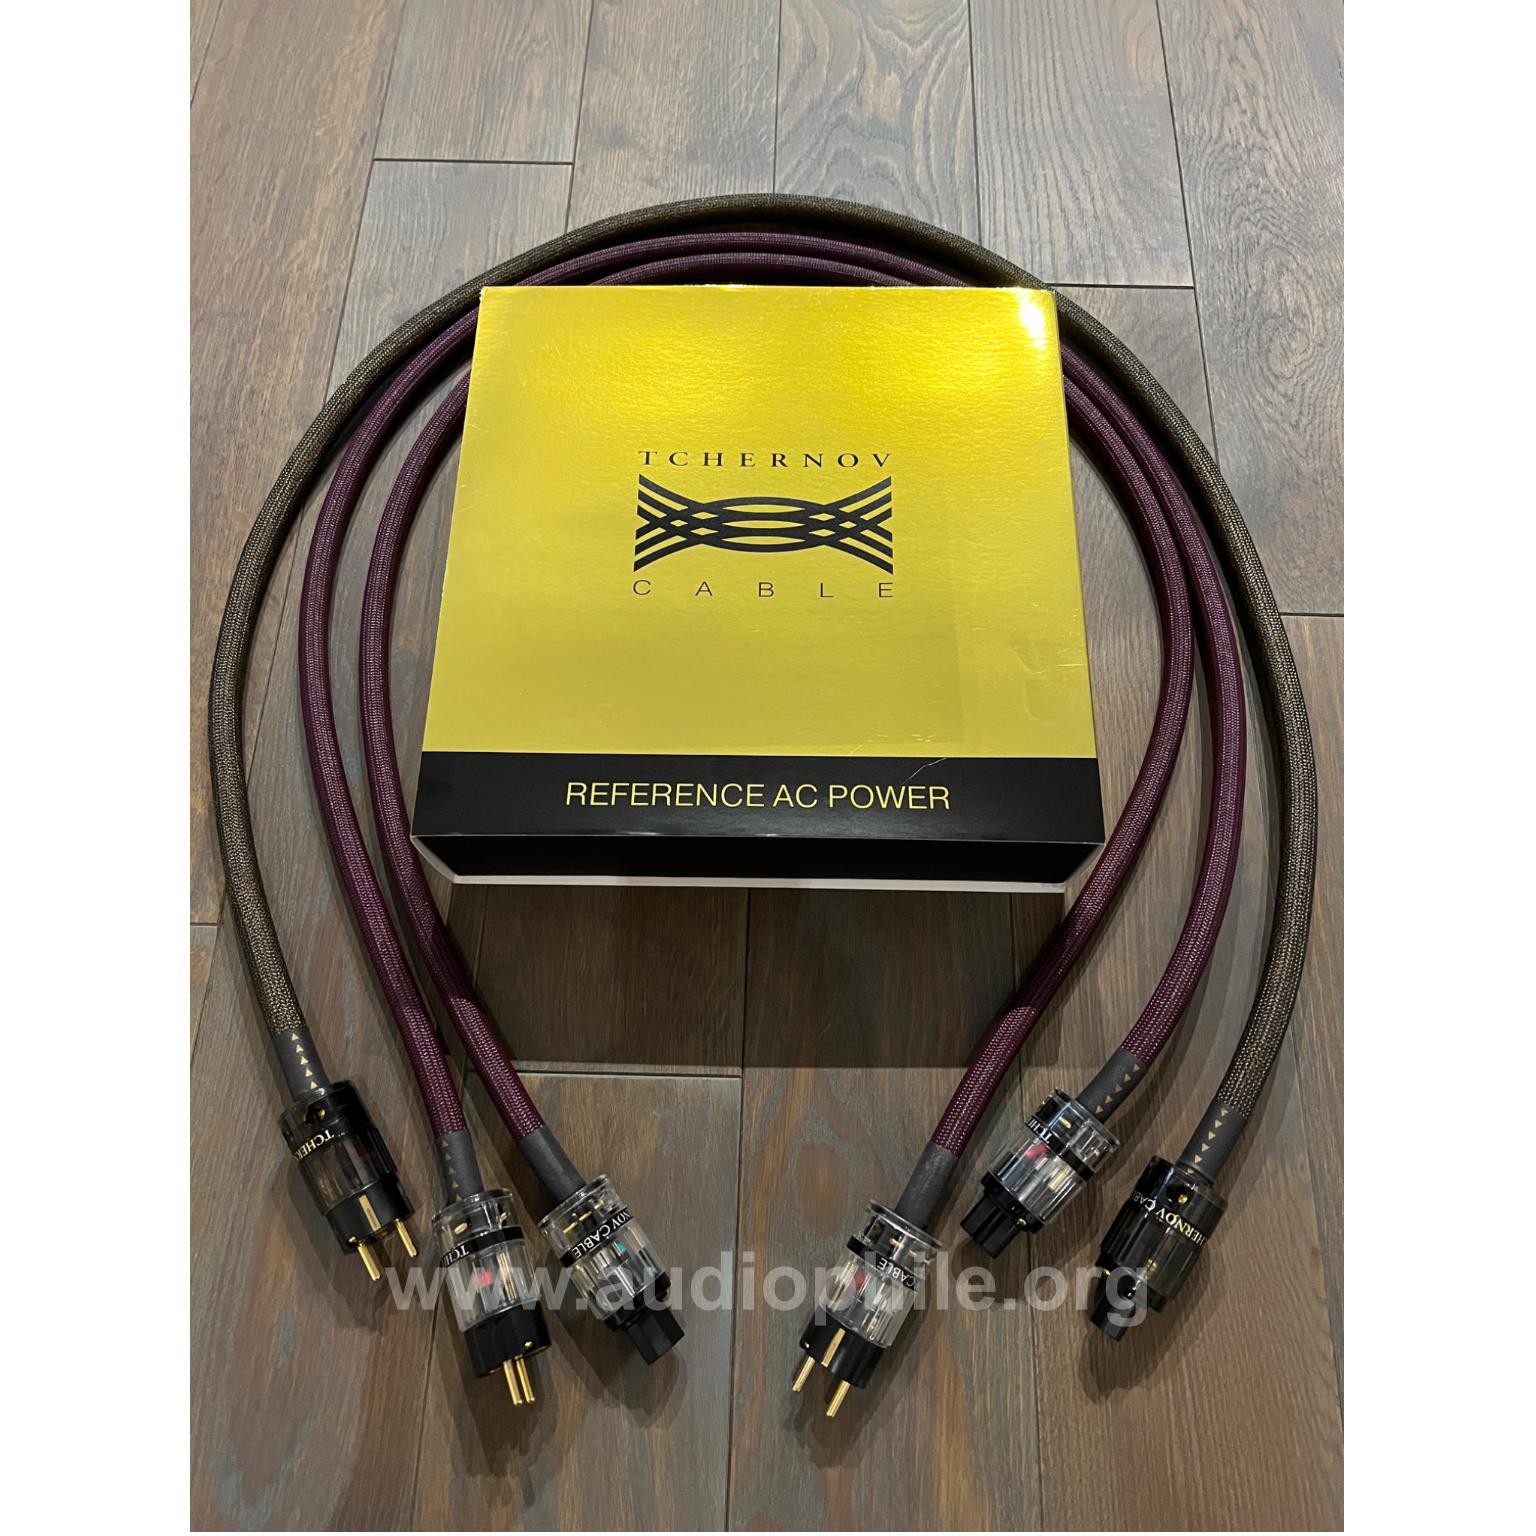 Tchernov reference and classic xs mkıı power cords